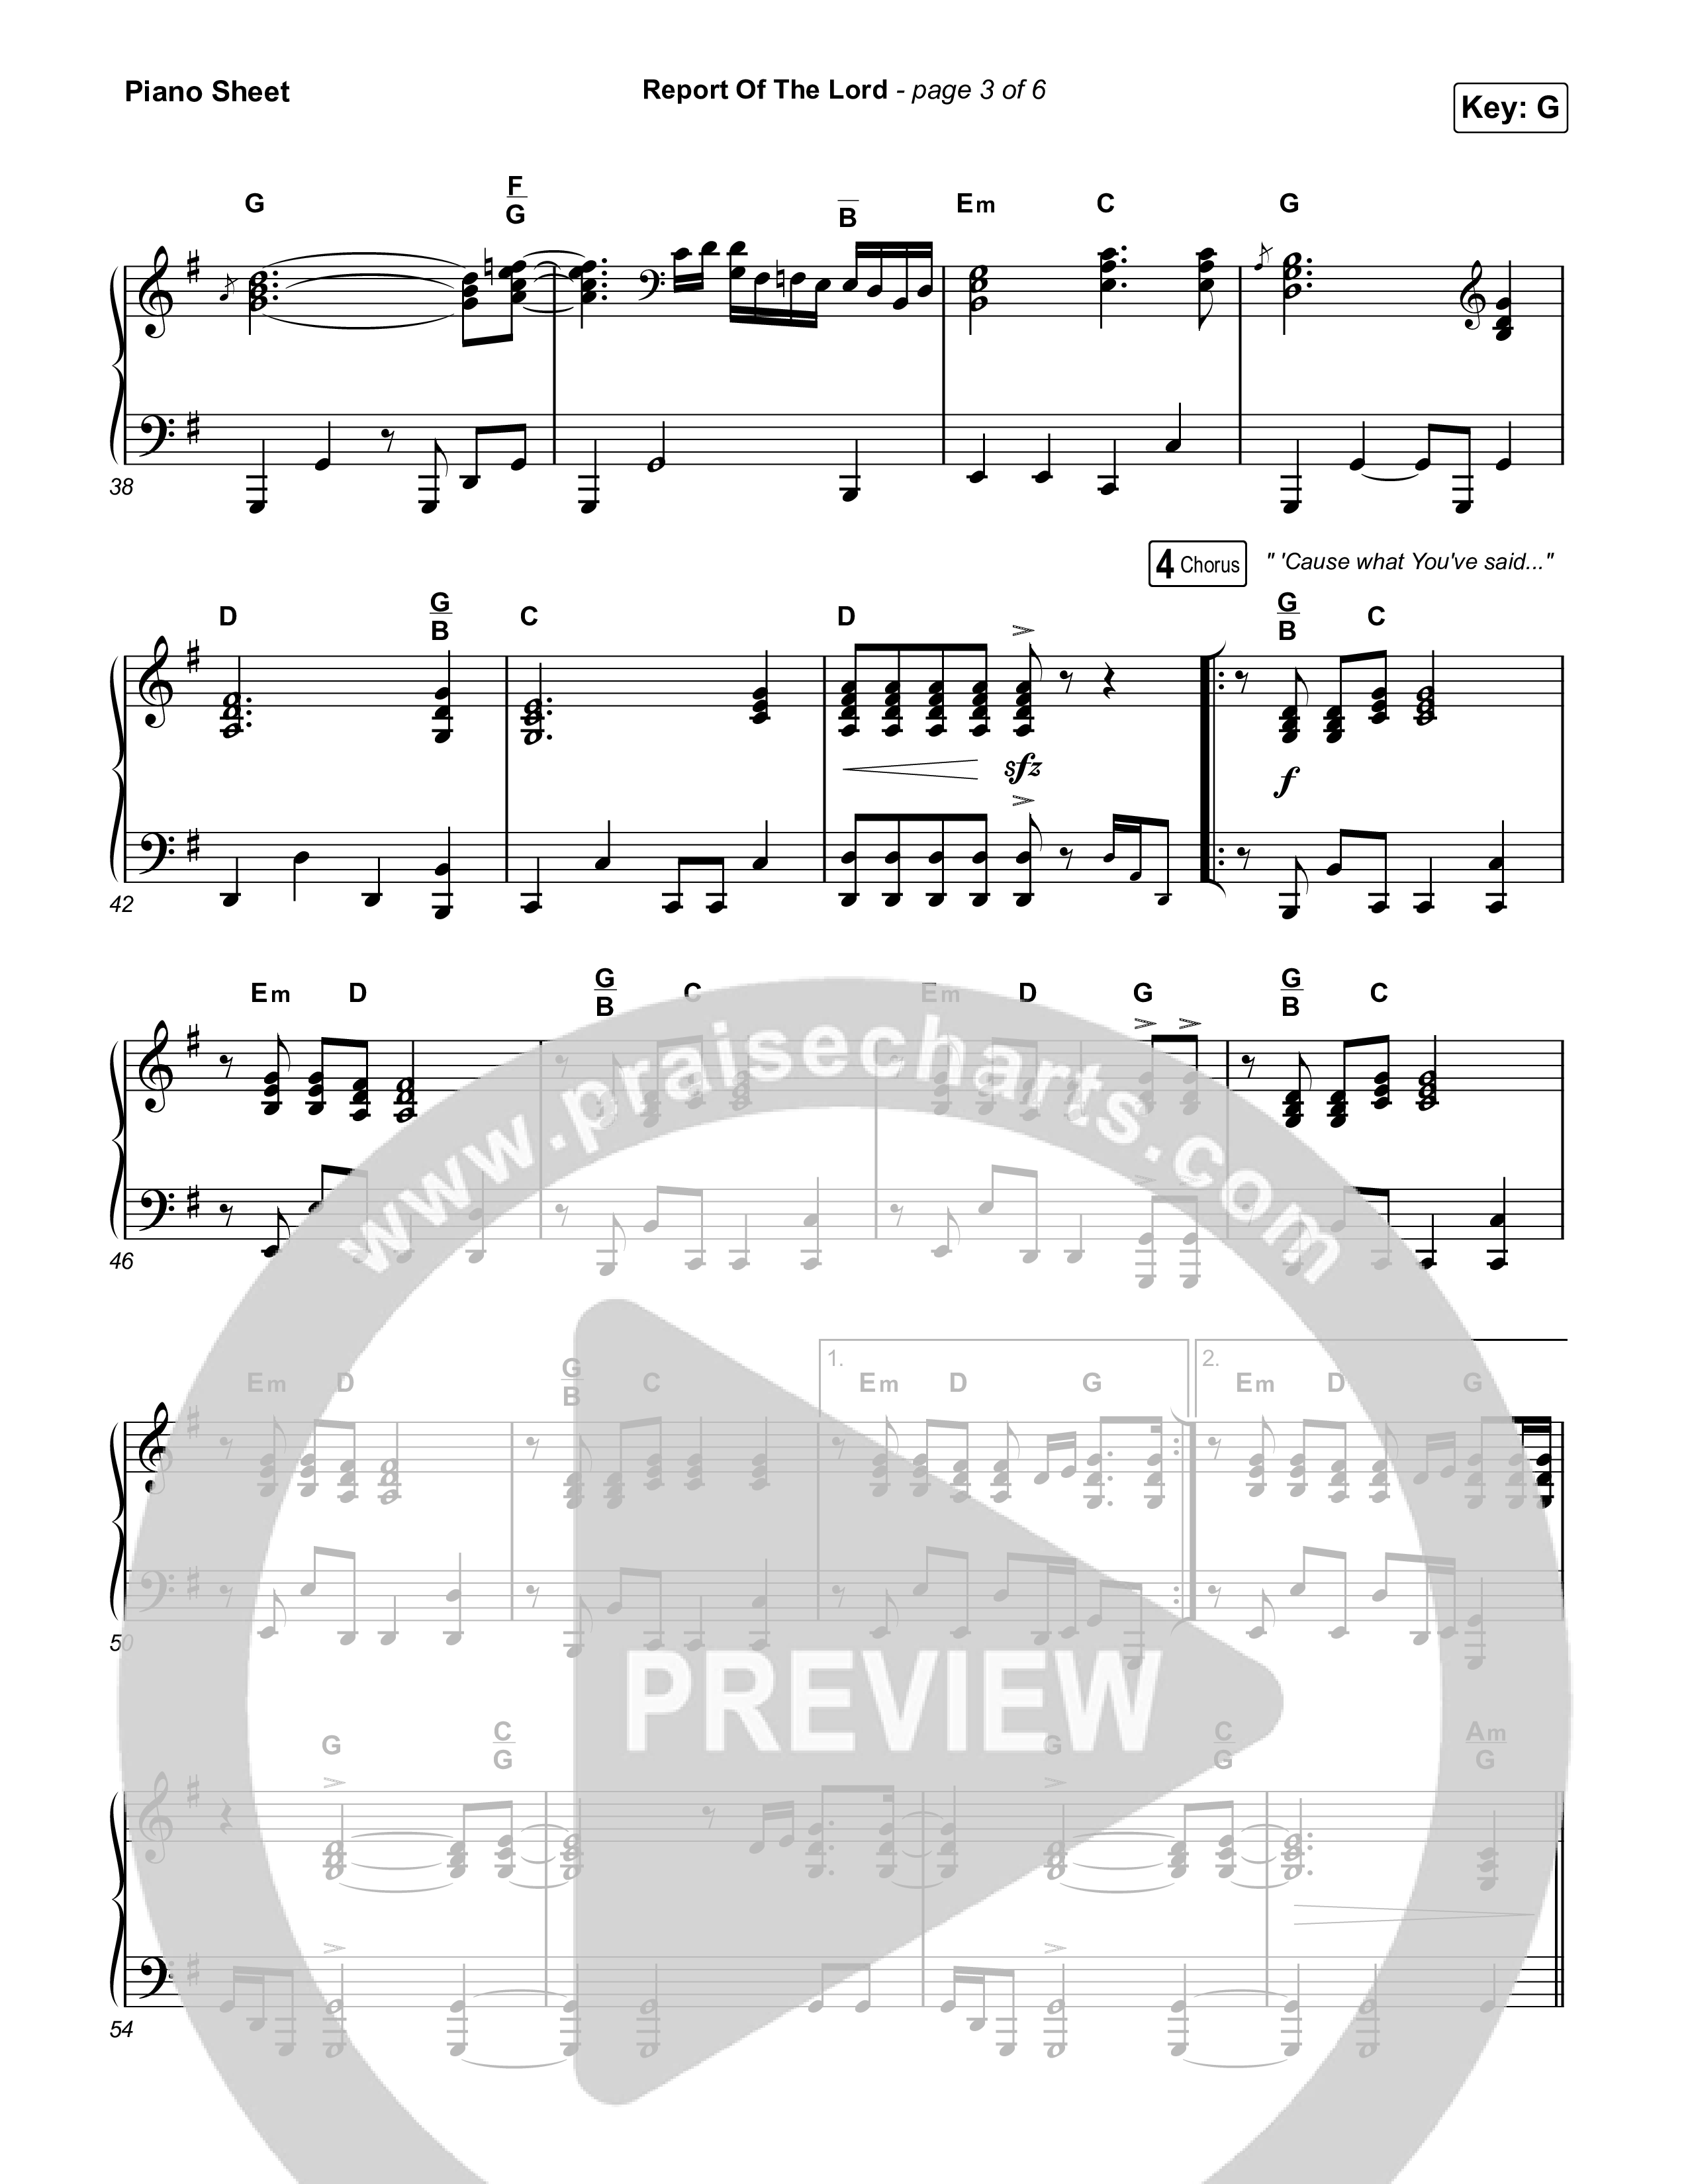 Report Of The Lord Piano Sheet (Charity Gayle)